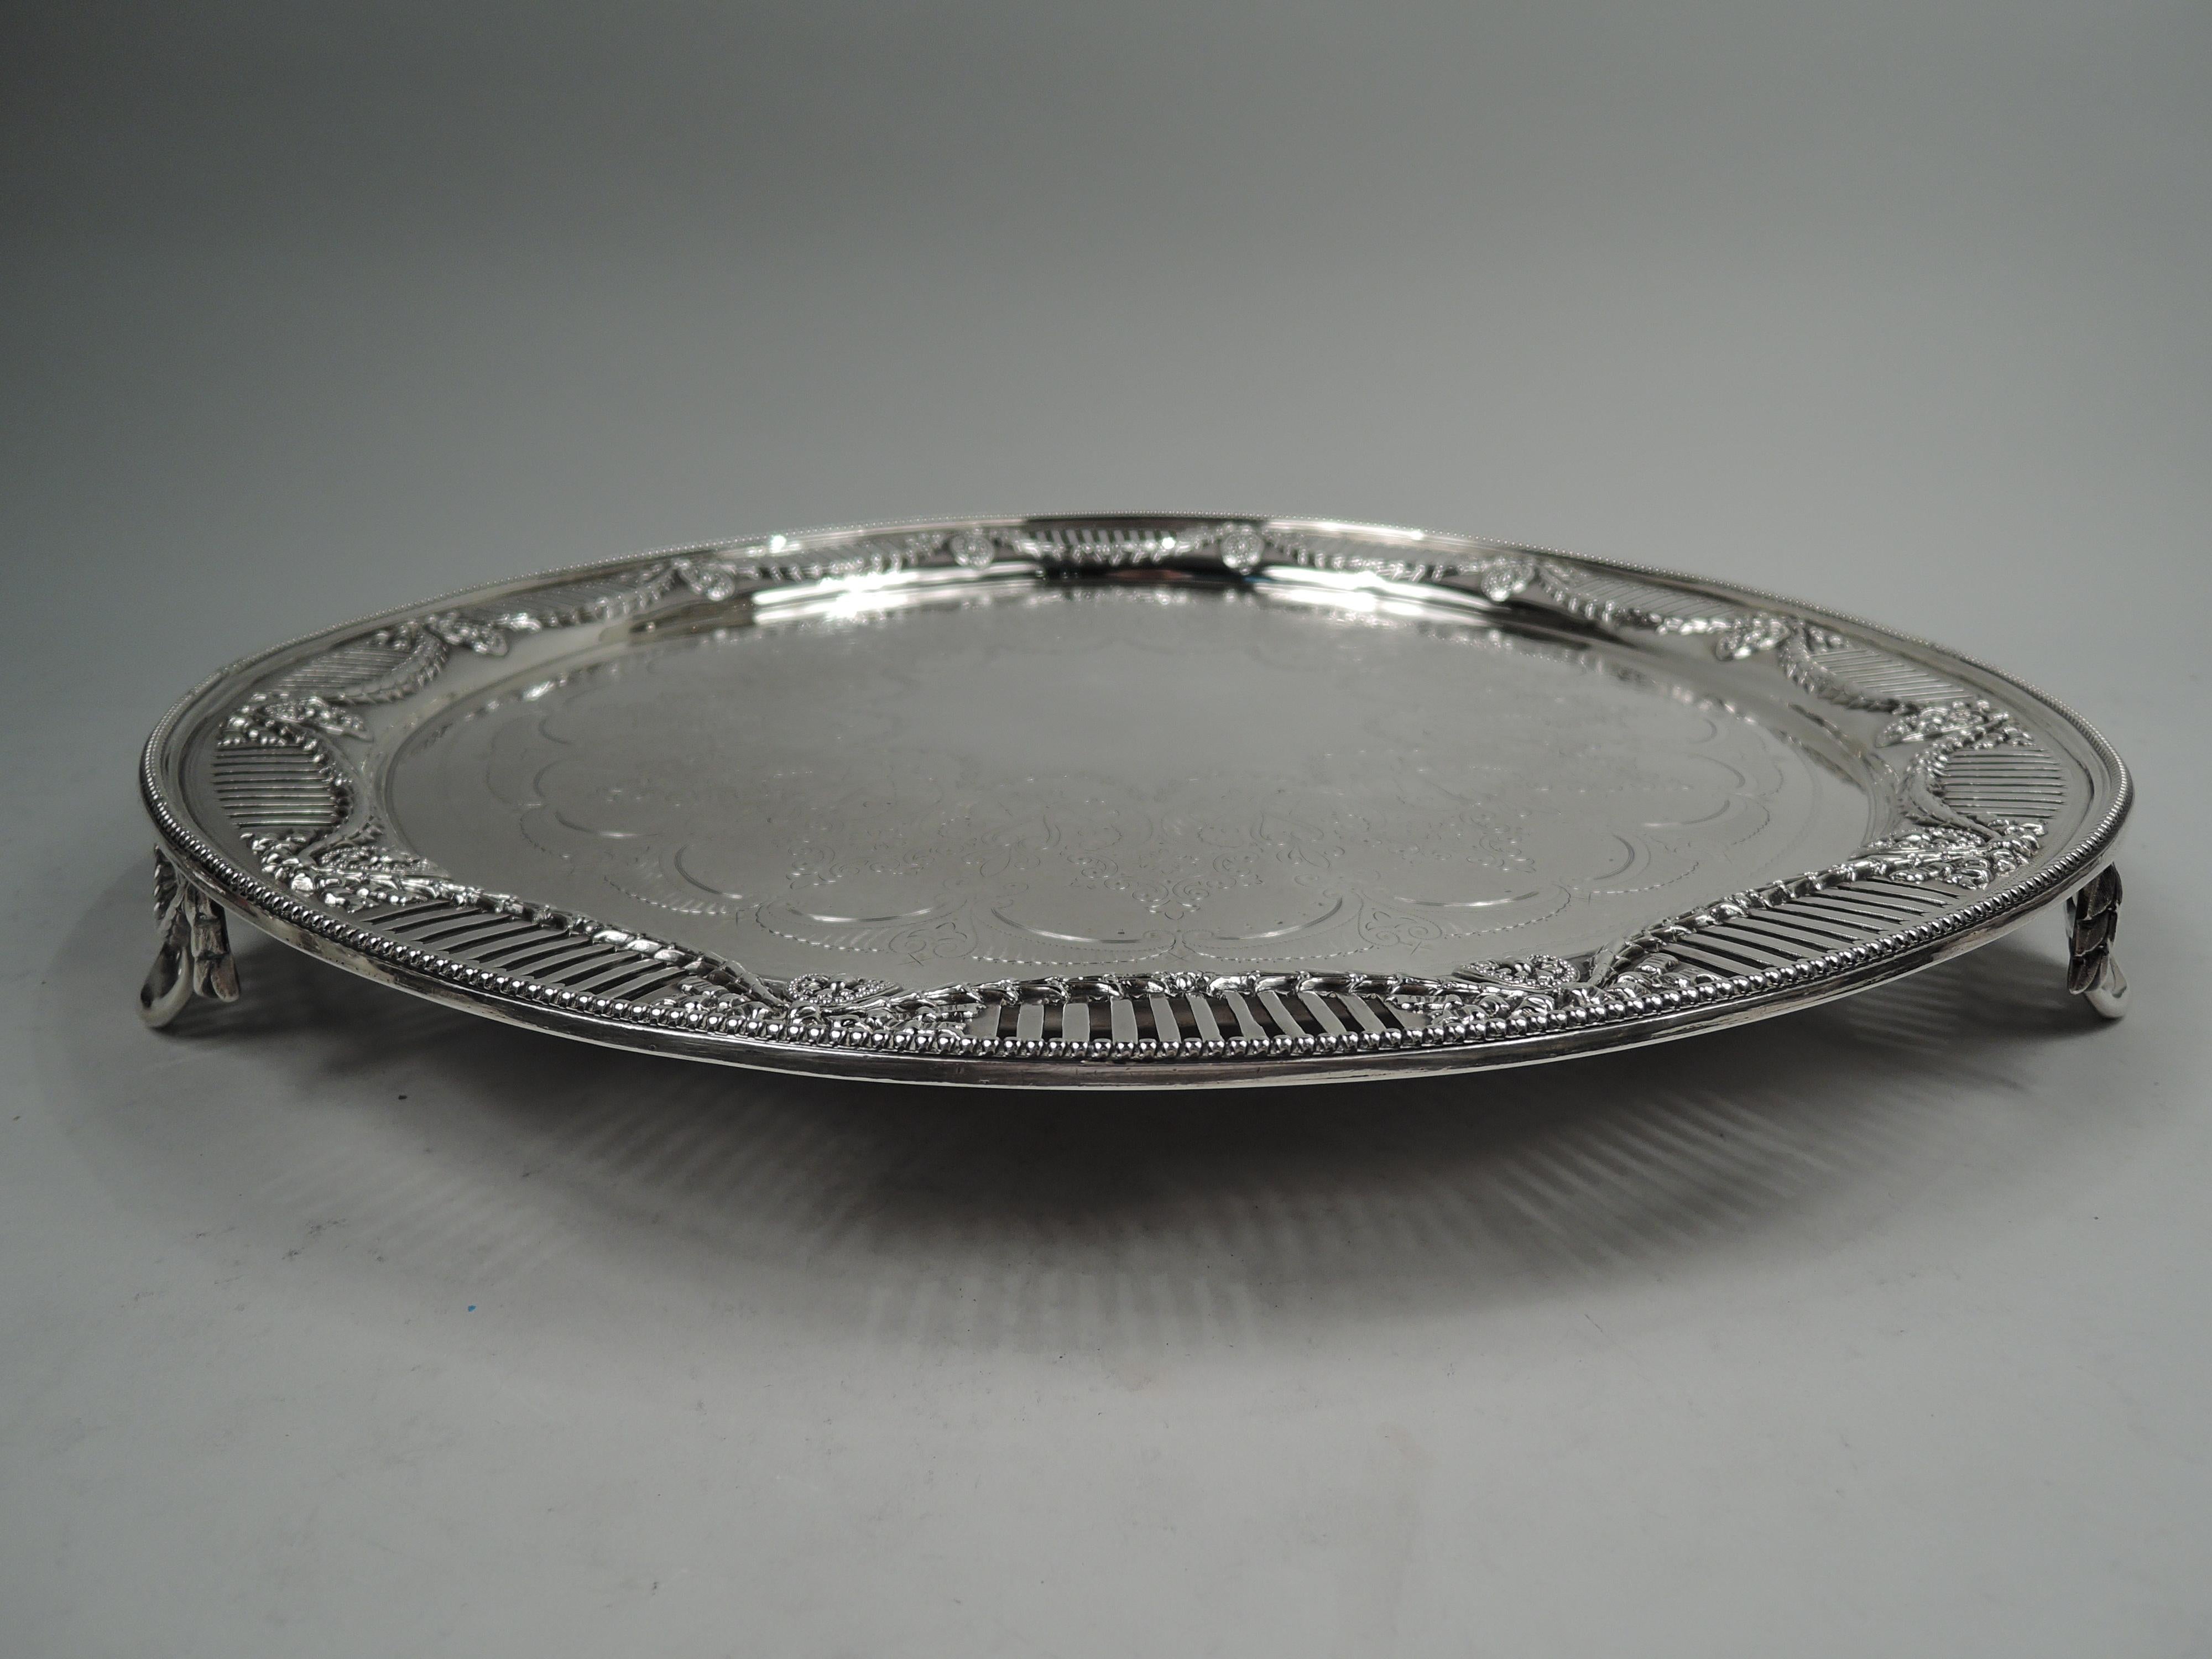 Victorian Regency Classical sterling silver salver. Made by John Aldwinckle and James Slater in London in 1880. Round and solid well engraved with stylized garland frame (vacant) in ornamental surround. Shoulder has applied ribbon-tied garland with